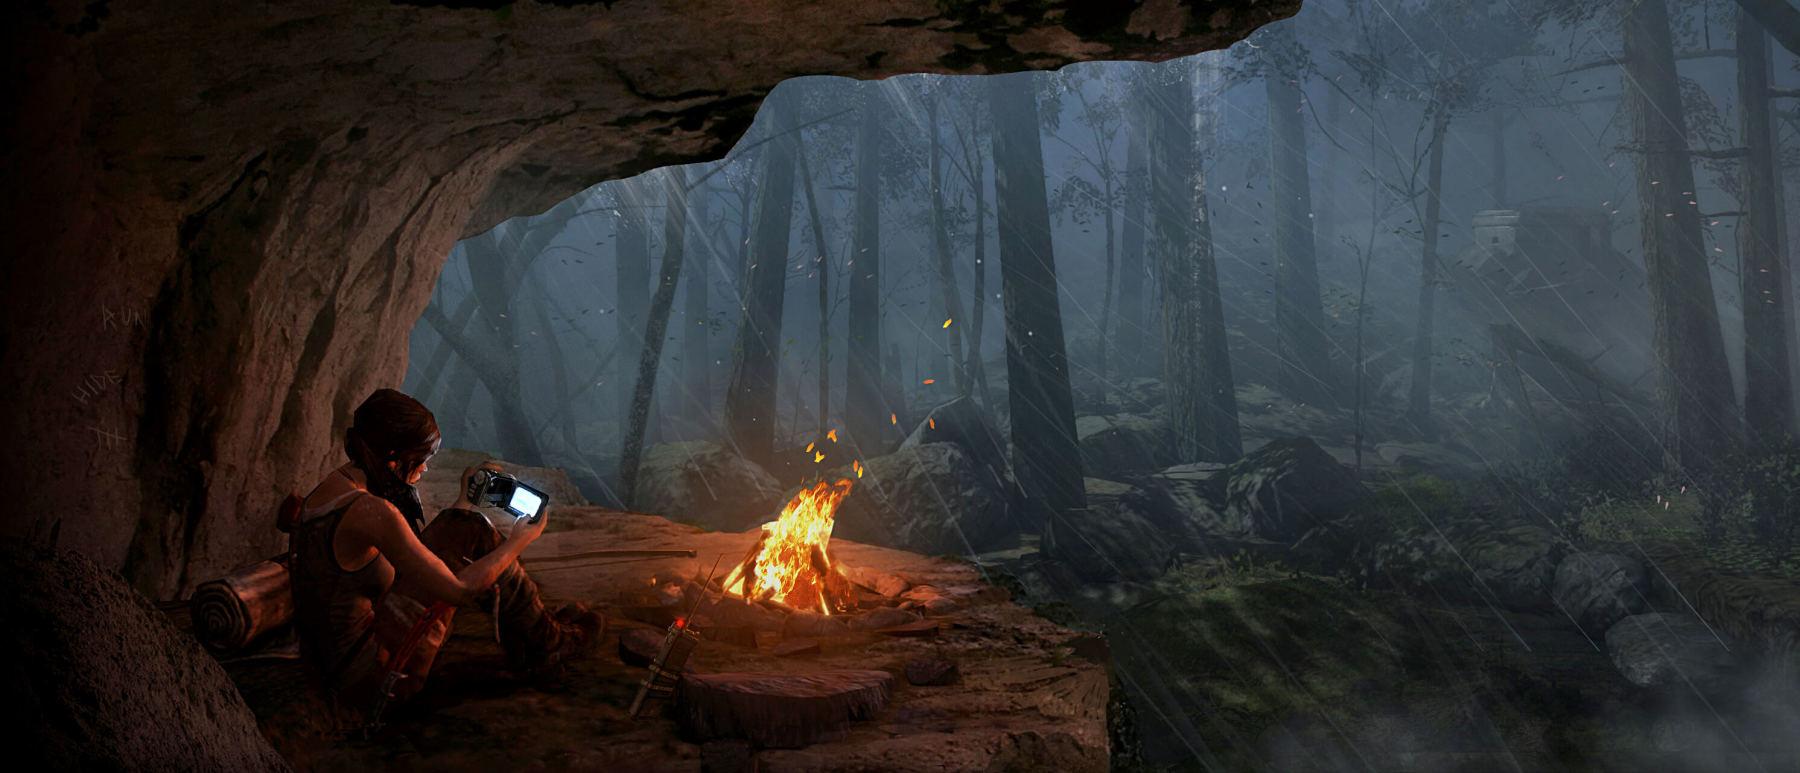 A solitary Lara sits by a campfire inside a cave, gazing at a tablet, with a dense, misty forest visible in the cave's mouth.